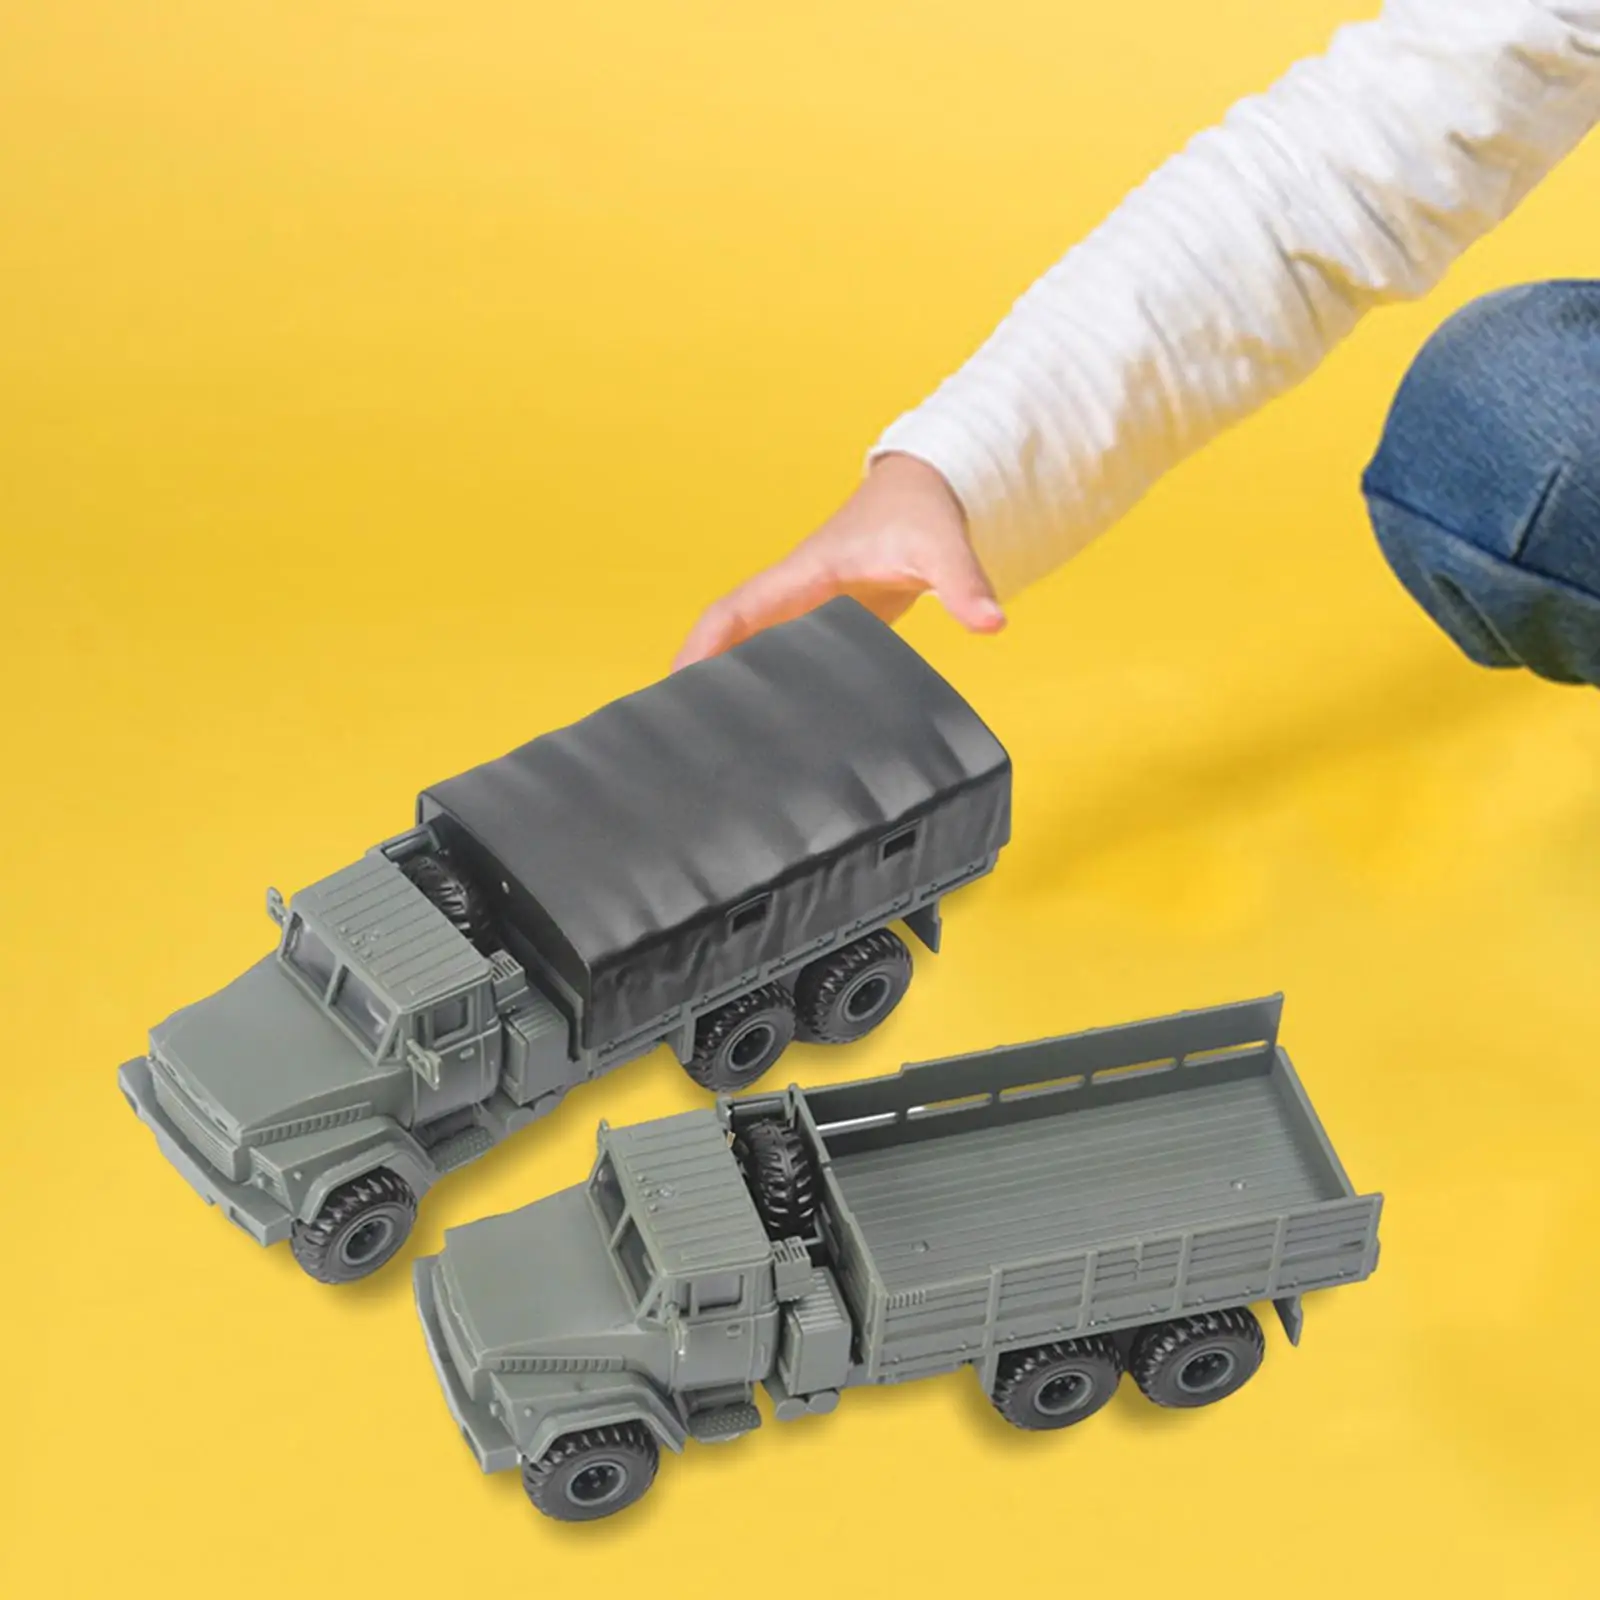 2 Pieces 1:72 Transport Truck Model Accessories Collection Ornament Toys Display Toy Car for Tabletop Gifts Unisex Boys Children